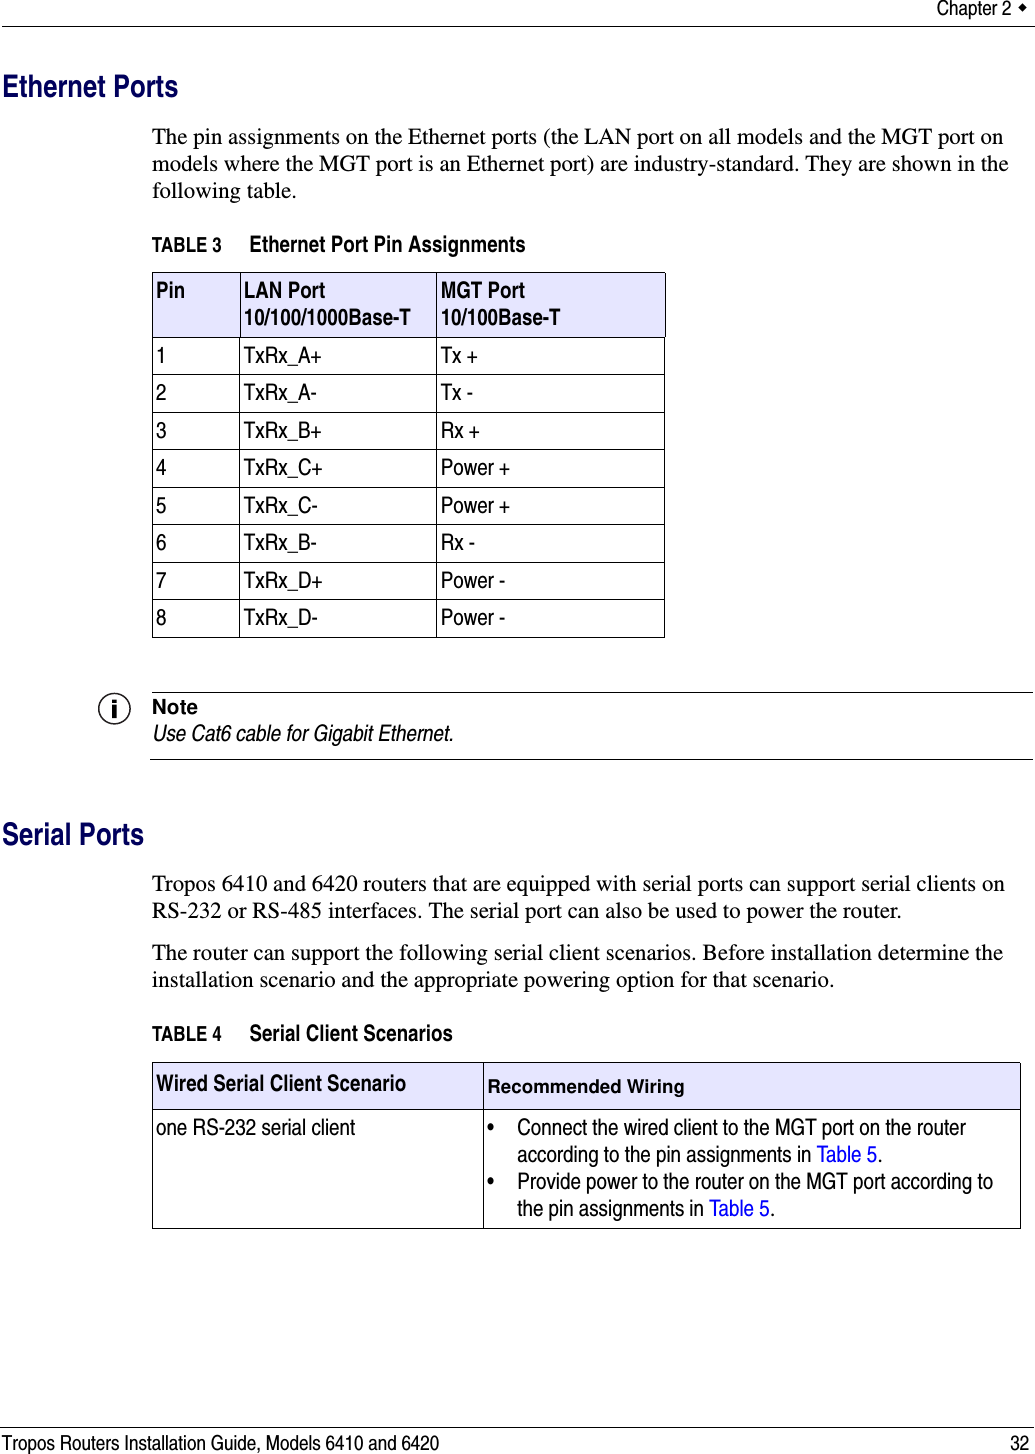 Chapter 2  Tropos Routers Installation Guide, Models 6410 and 6420 32Ethernet PortsThe pin assignments on the Ethernet ports (the LAN port on all models and the MGT port on models where the MGT port is an Ethernet port) are industry-standard. They are shown in the following table.NoteUse Cat6 cable for Gigabit Ethernet.Serial PortsTropos 6410 and 6420 routers that are equipped with serial ports can support serial clients on RS-232 or RS-485 interfaces. The serial port can also be used to power the router. The router can support the following serial client scenarios. Before installation determine the installation scenario and the appropriate powering option for that scenario.TABLE 3 Ethernet Port Pin AssignmentsPin LAN Port10/100/1000Base-T MGT Port10/100Base-T1 TxRx_A+ Tx +2 TxRx_A- Tx -3 TxRx_B+ Rx +4 TxRx_C+ Power +5 TxRx_C- Power +6 TxRx_B- Rx - 7 TxRx_D+ Power -8 TxRx_D- Power -TABLE 4 Serial Client ScenariosWired Serial Client Scenario Recommended Wiringone RS-232 serial client • Connect the wired client to the MGT port on the router according to the pin assignments in Table 5.• Provide power to the router on the MGT port according to the pin assignments in Table 5.